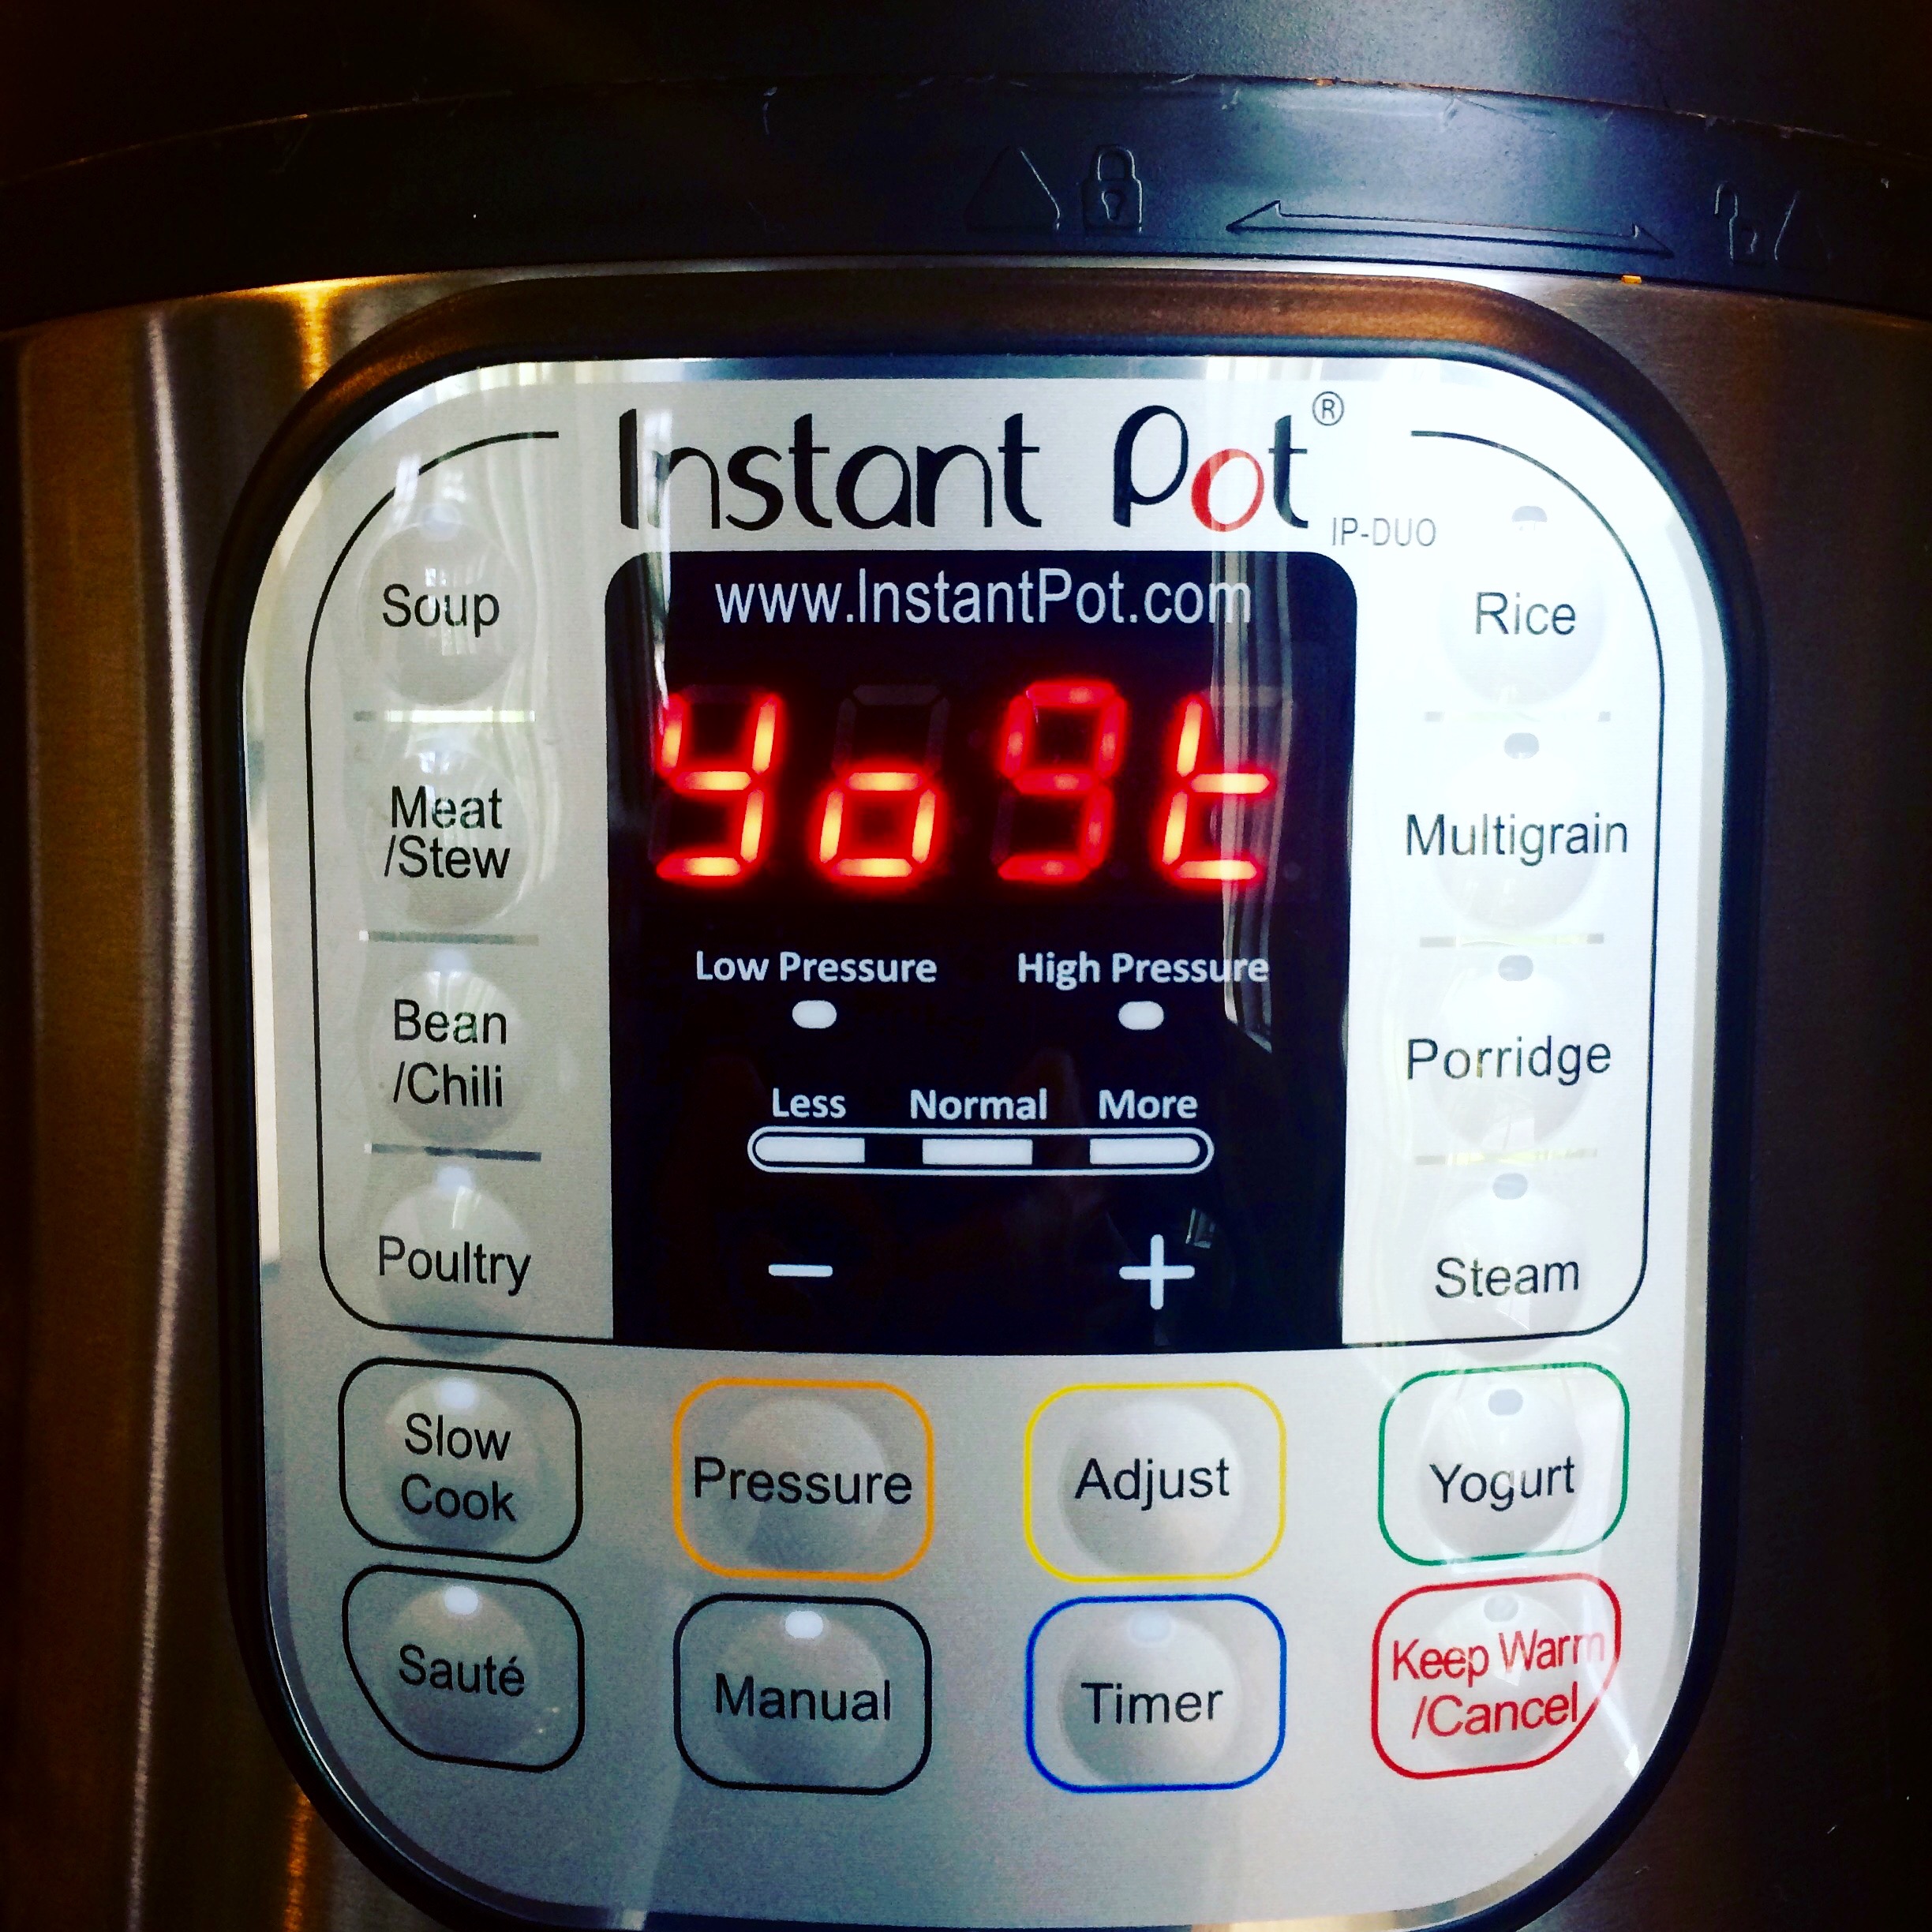 How to make Non-dairy Yogurt (with fruit on the bottom) in the Instant Pot.